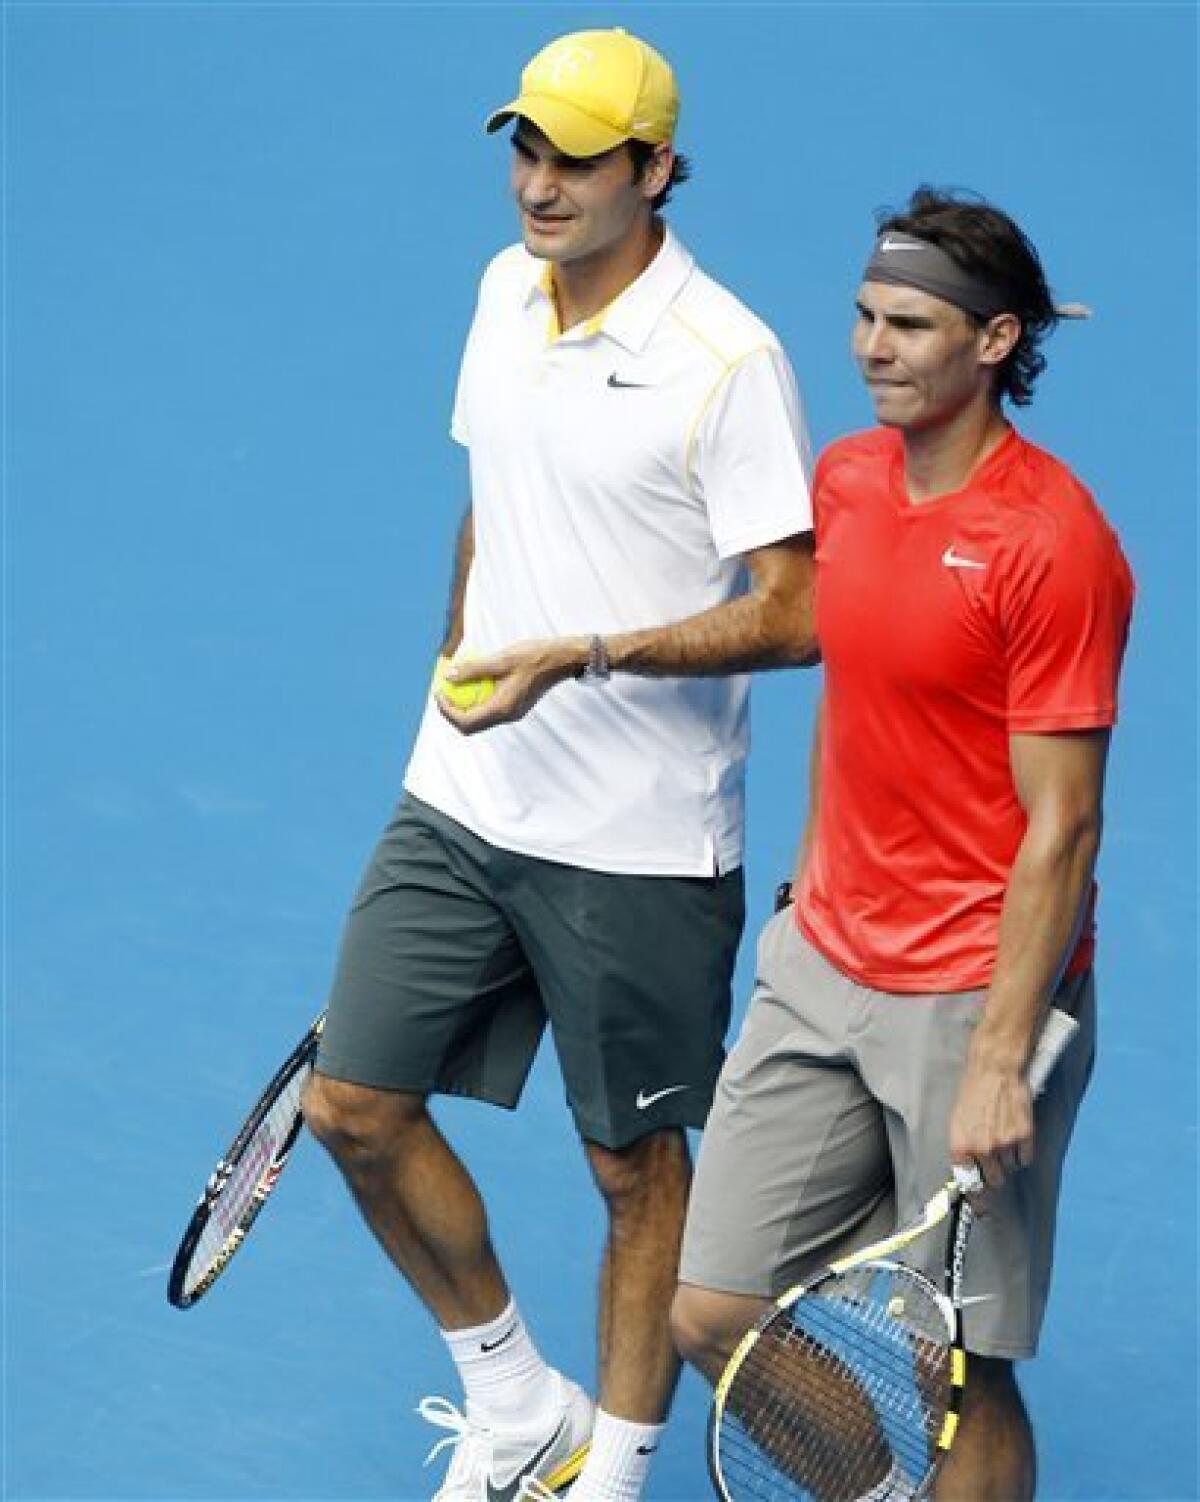 Friends for now, Rafa and Roger warm up together - The San Diego